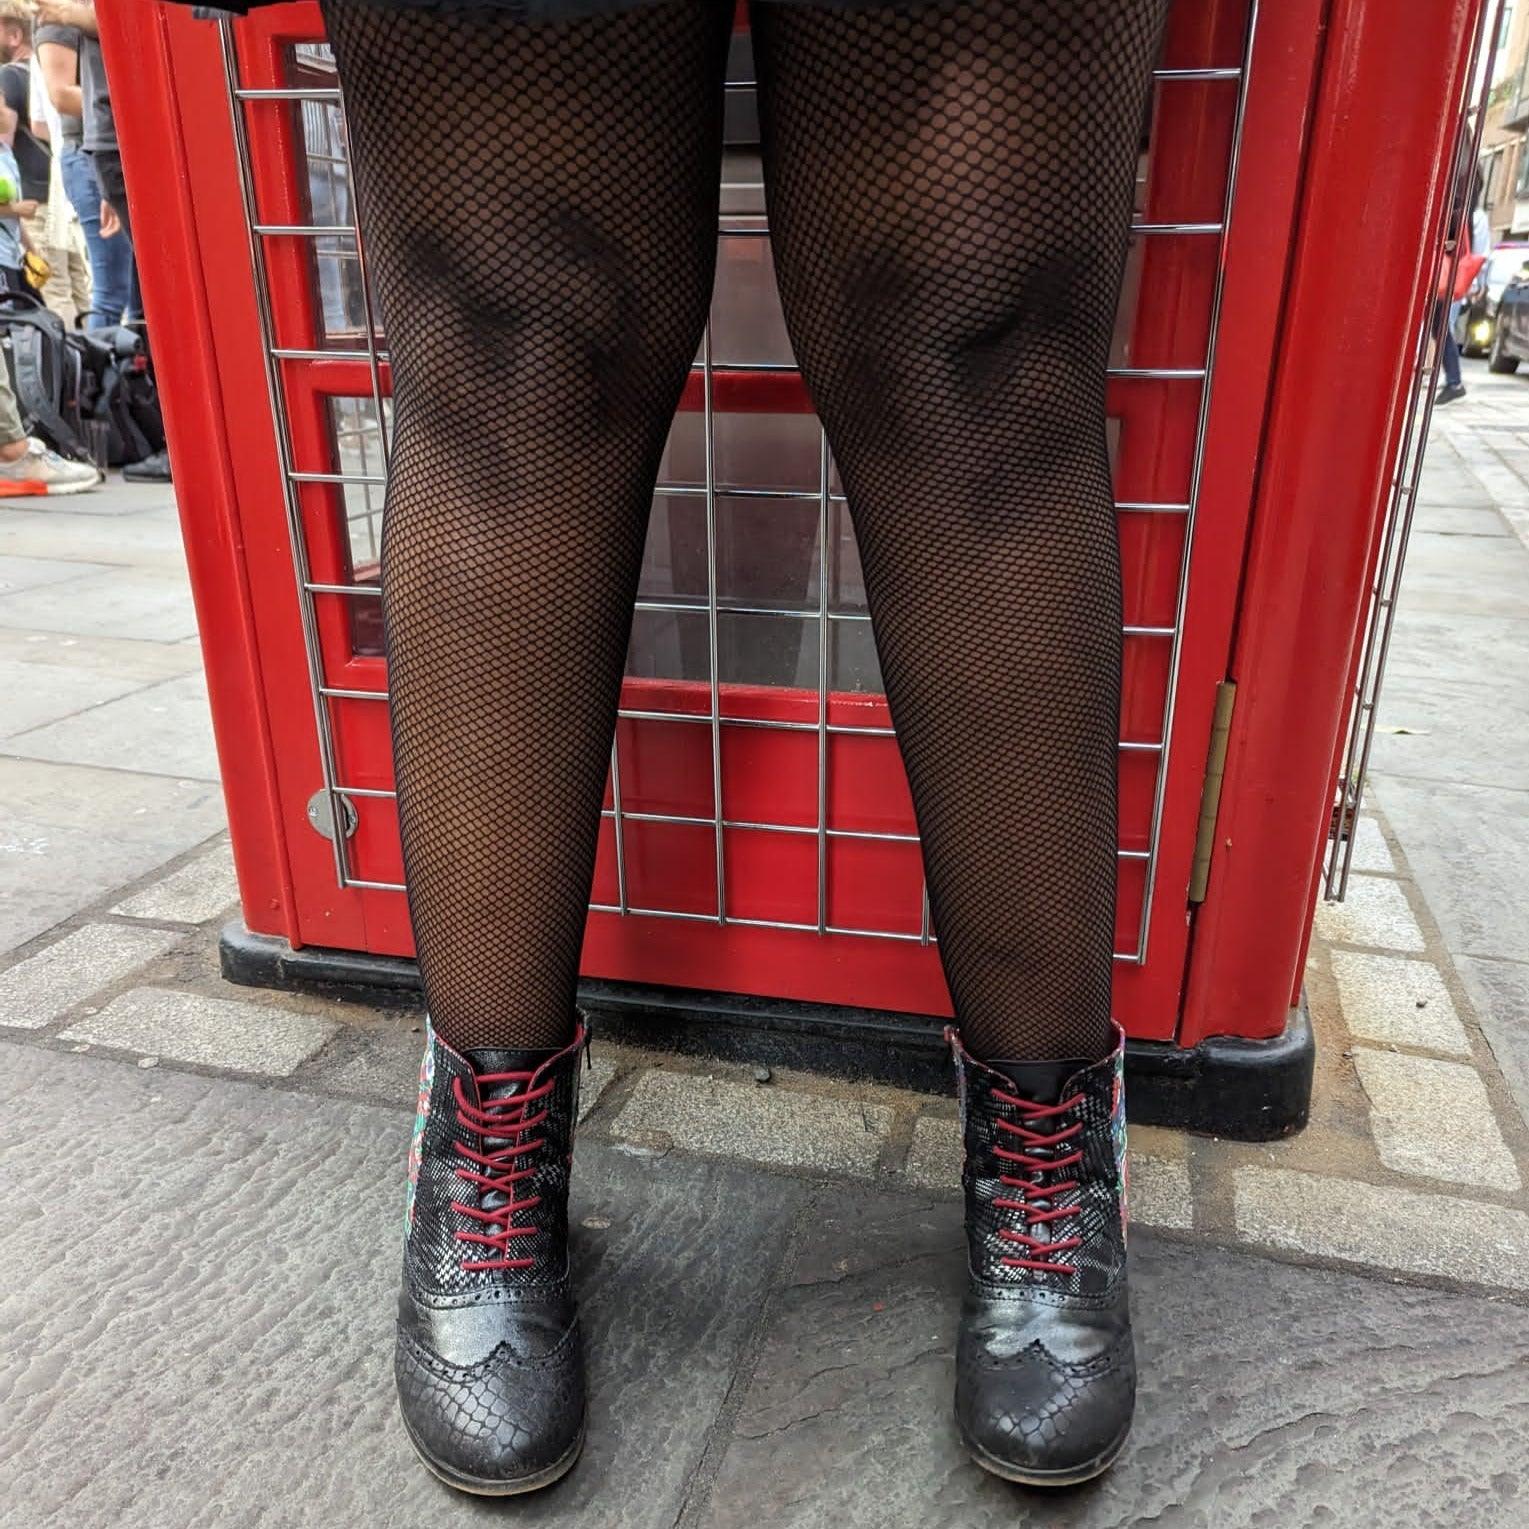 Legale Fishnet Tights, M/L - Smith's Food and Drug